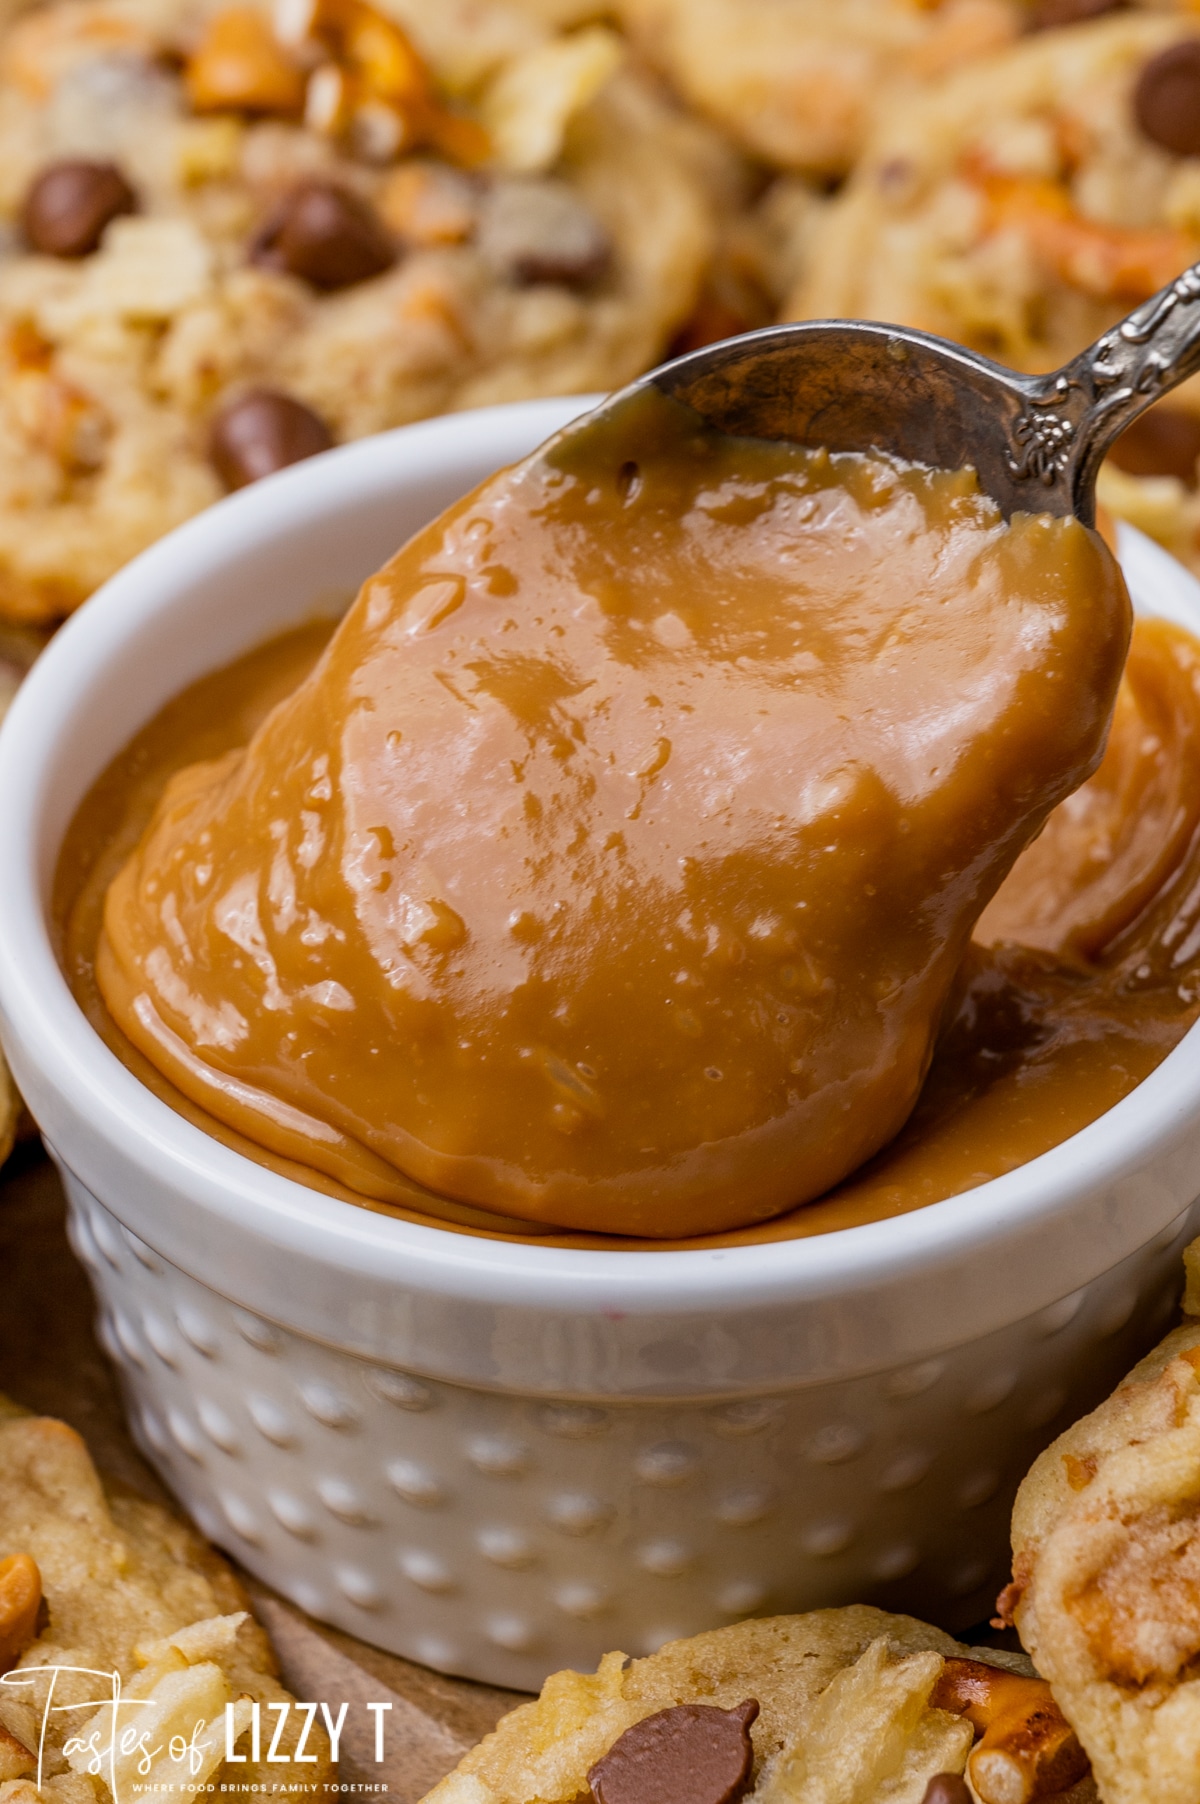 What Is Dulce de Leche and How Do You Make It?